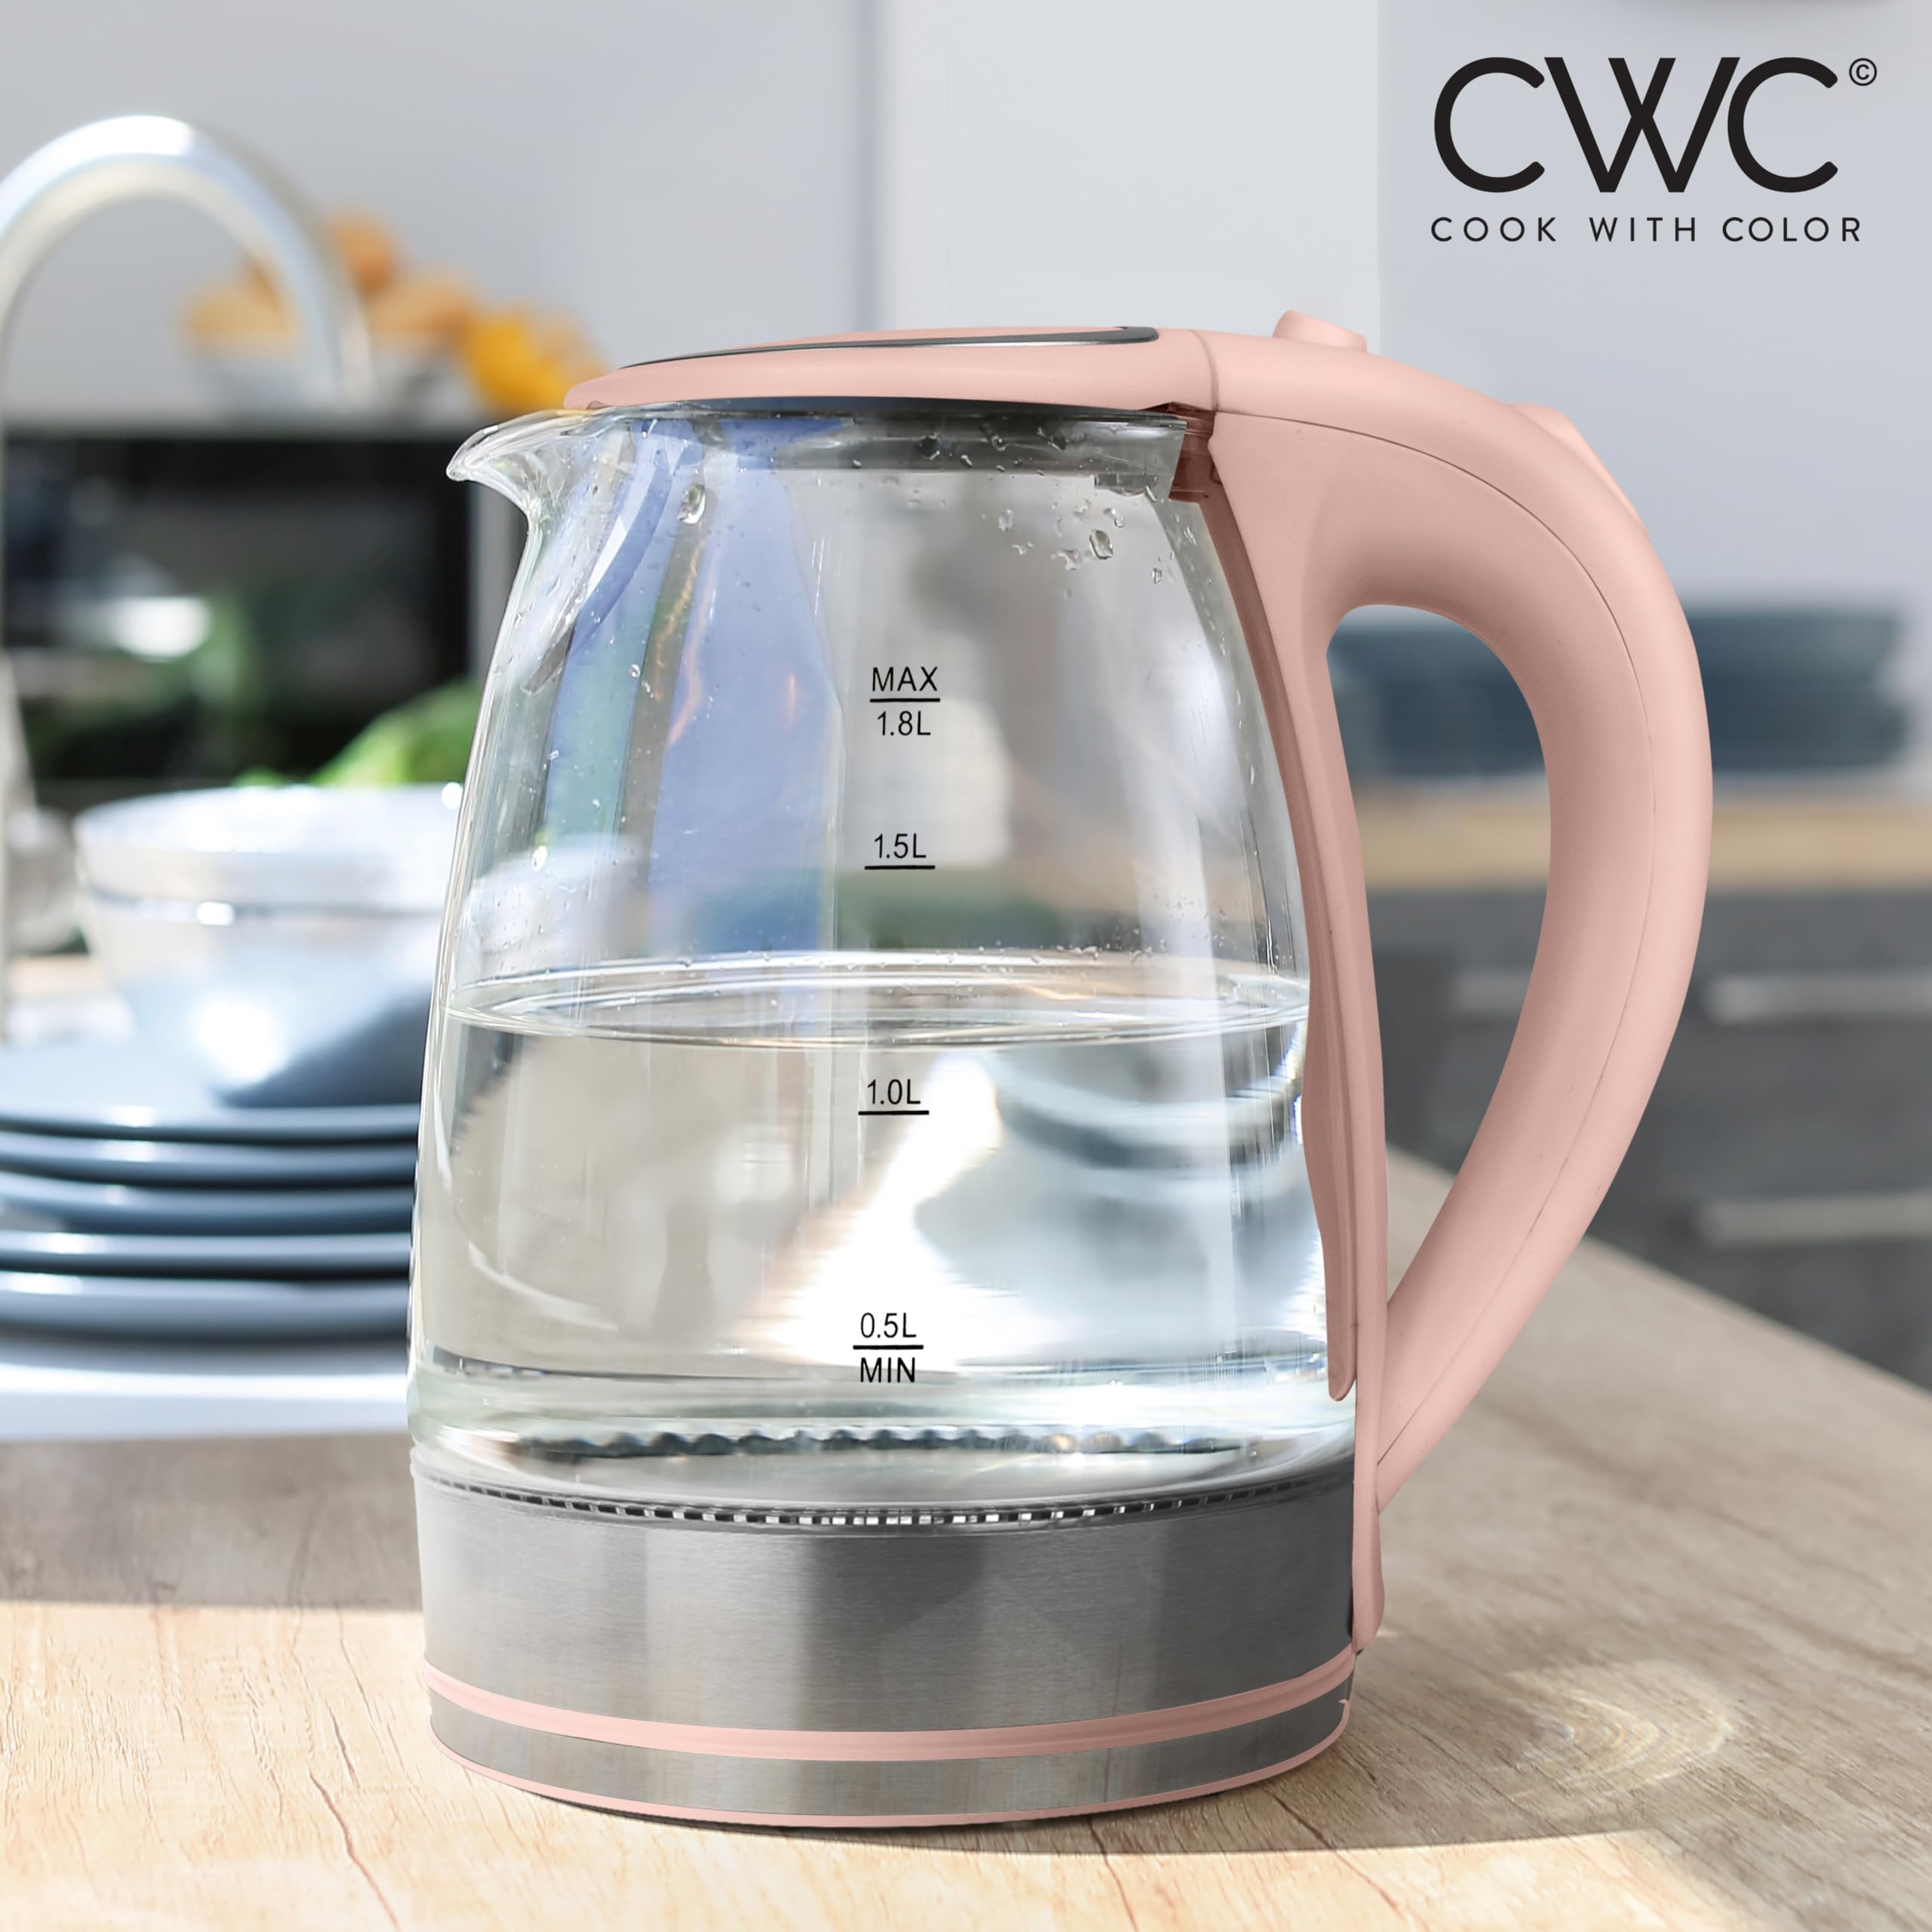 COOK WITH COLOR Glass Electric Kettle 1.8L - Rapid Boil, Sleek Design, and Safety Features - Great for Quick and Easy, Blush